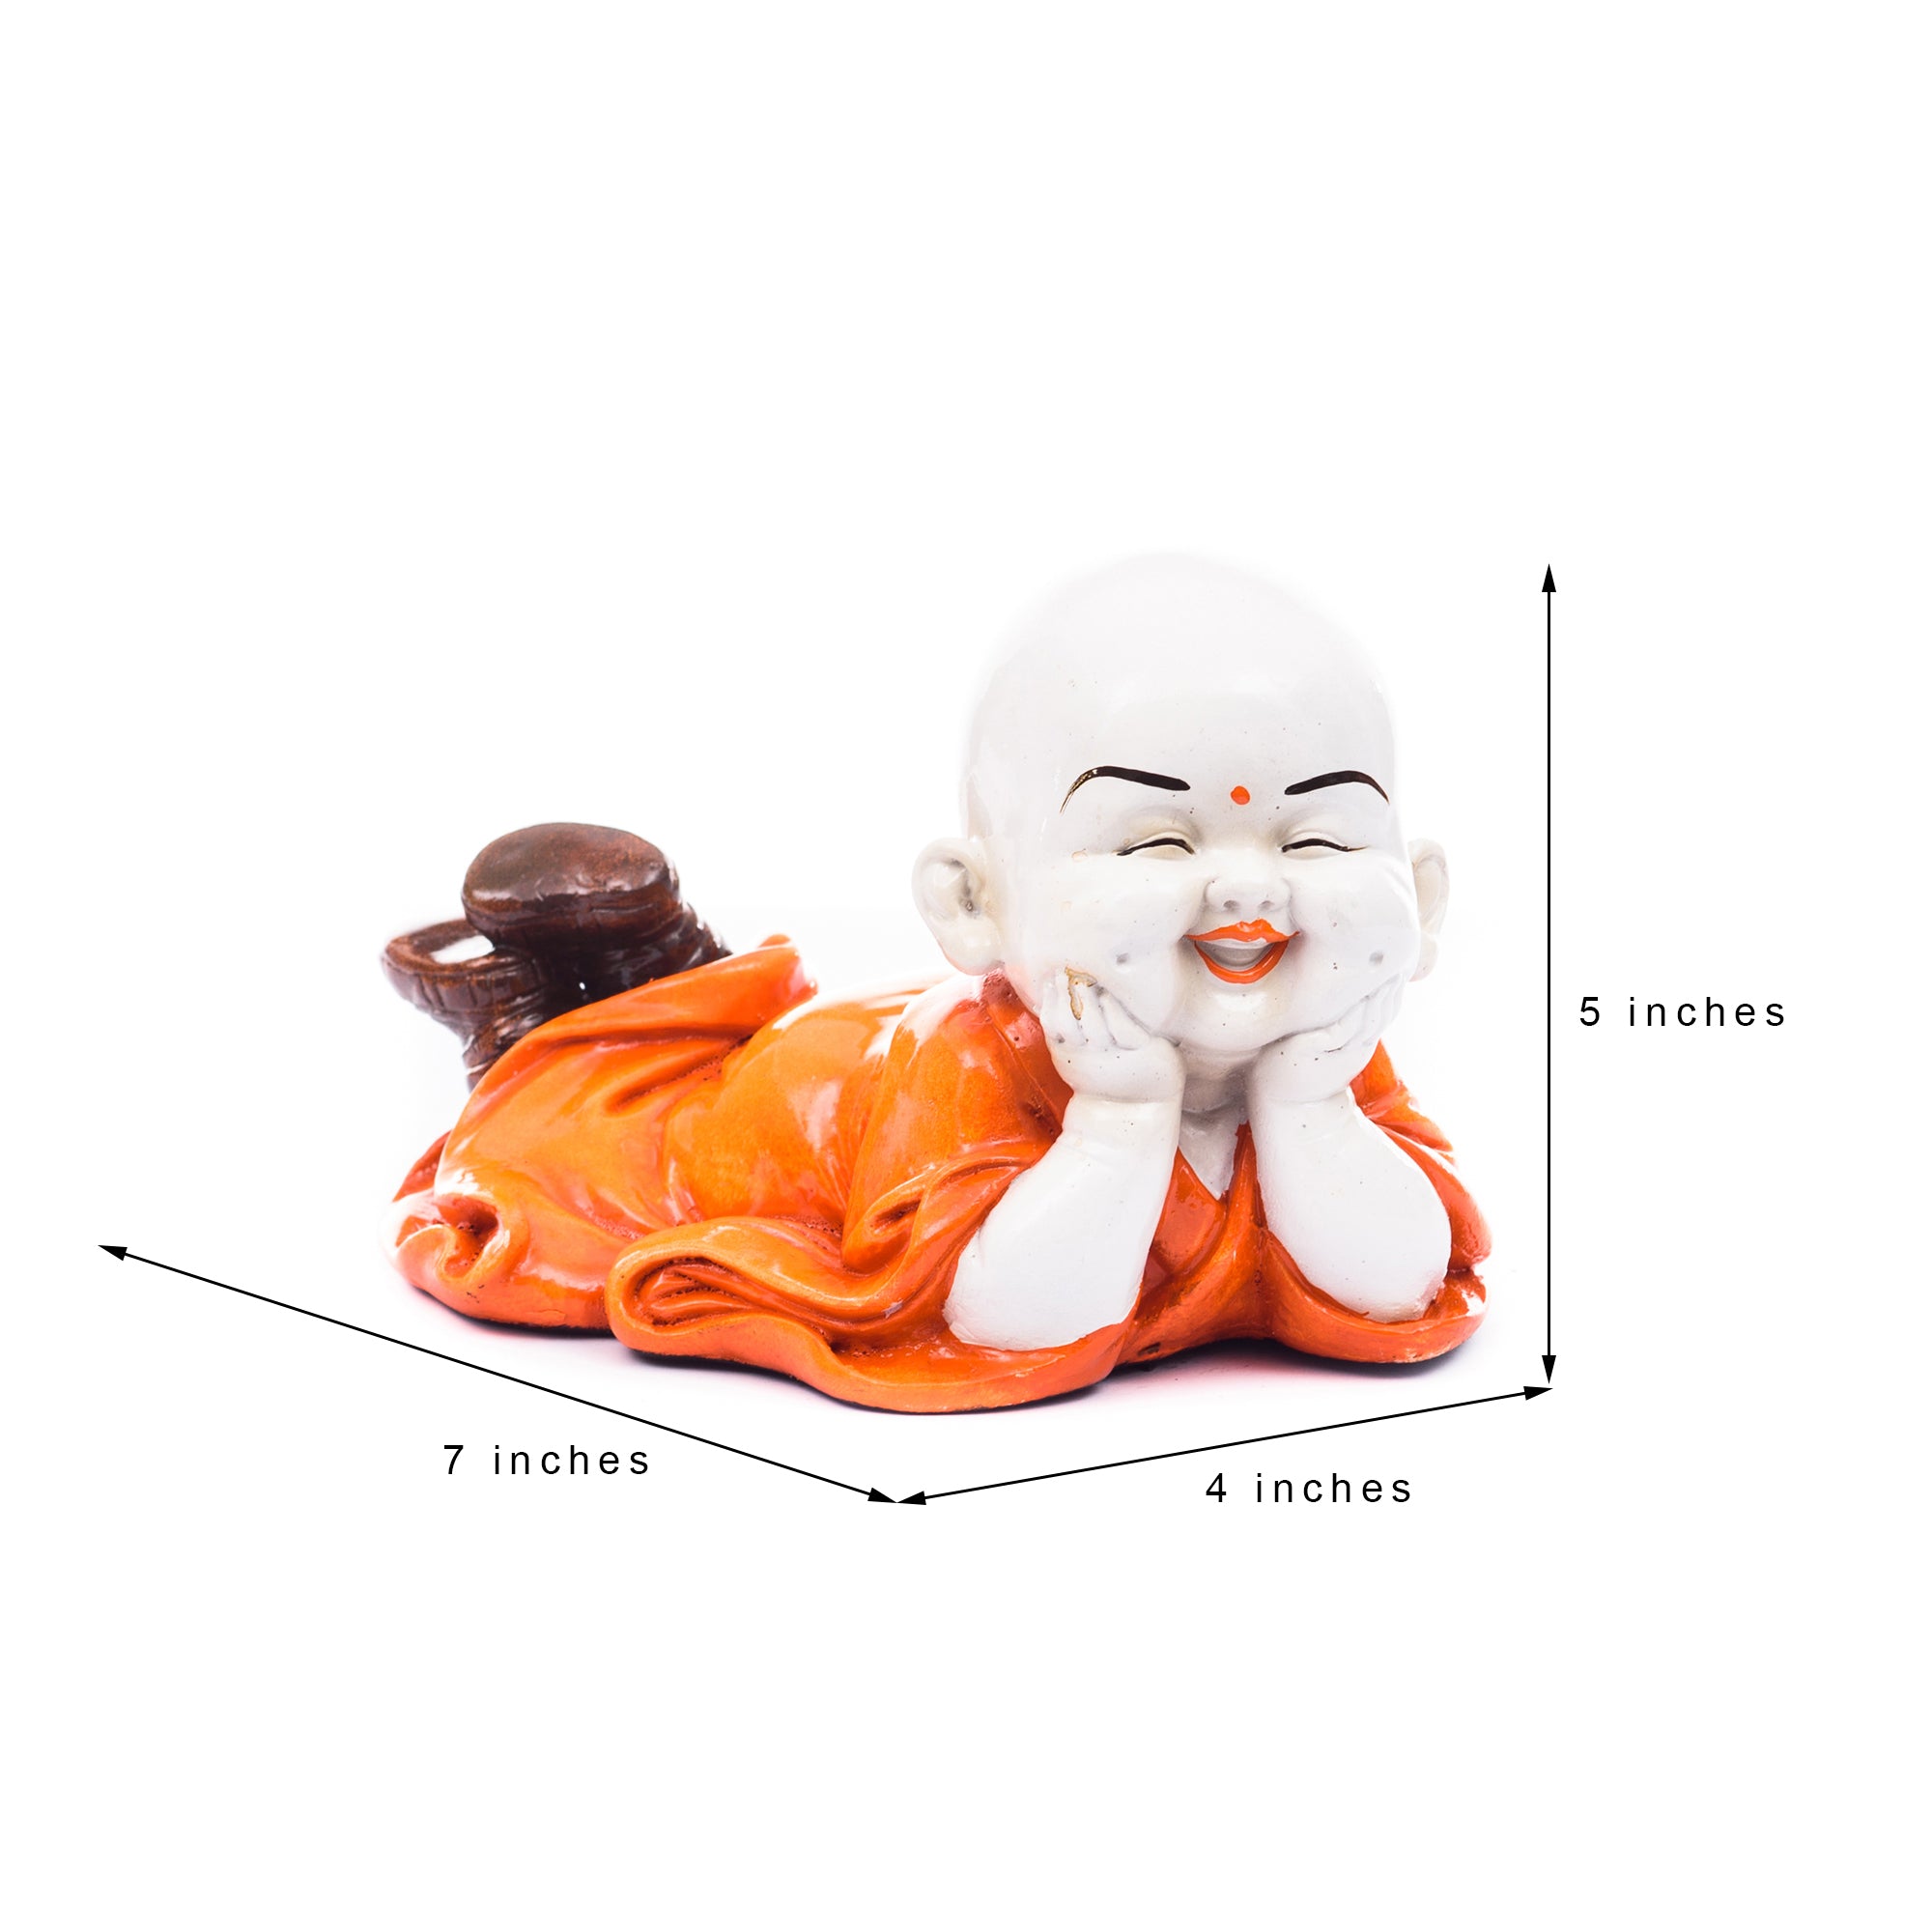 Polyresin Resting Laughing Cute Baby Buddha Statue 2